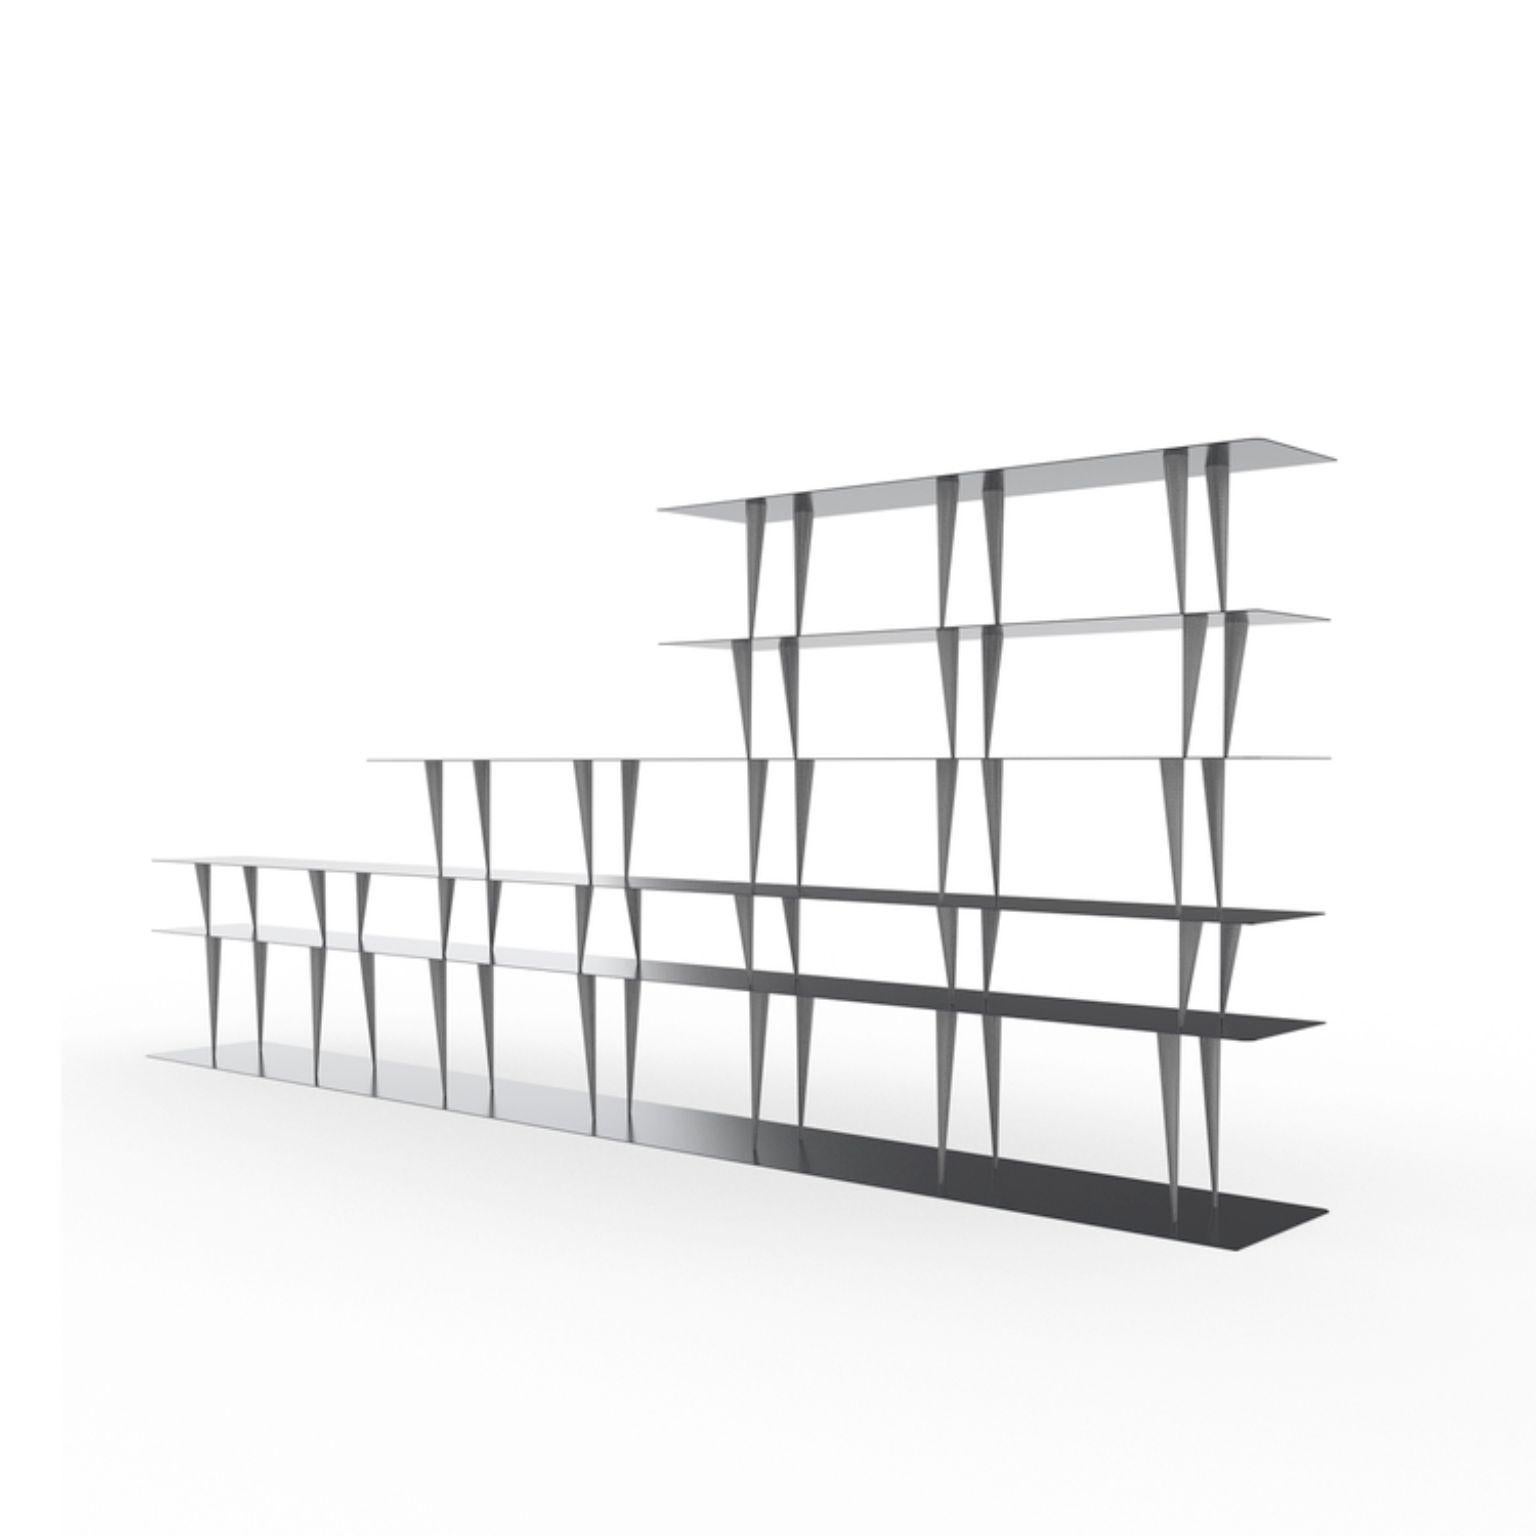 Mori shelves by Tokio
Dimensions: D 50 x W 472 x H 184.3 cm.
Materials: Steel, carbon fiber.

Shelves in steel with carbon fiber legs in four different hights, 27cm, 33cm, 38cm and 48cm. Different color finishes. Custom sizes available.

A new